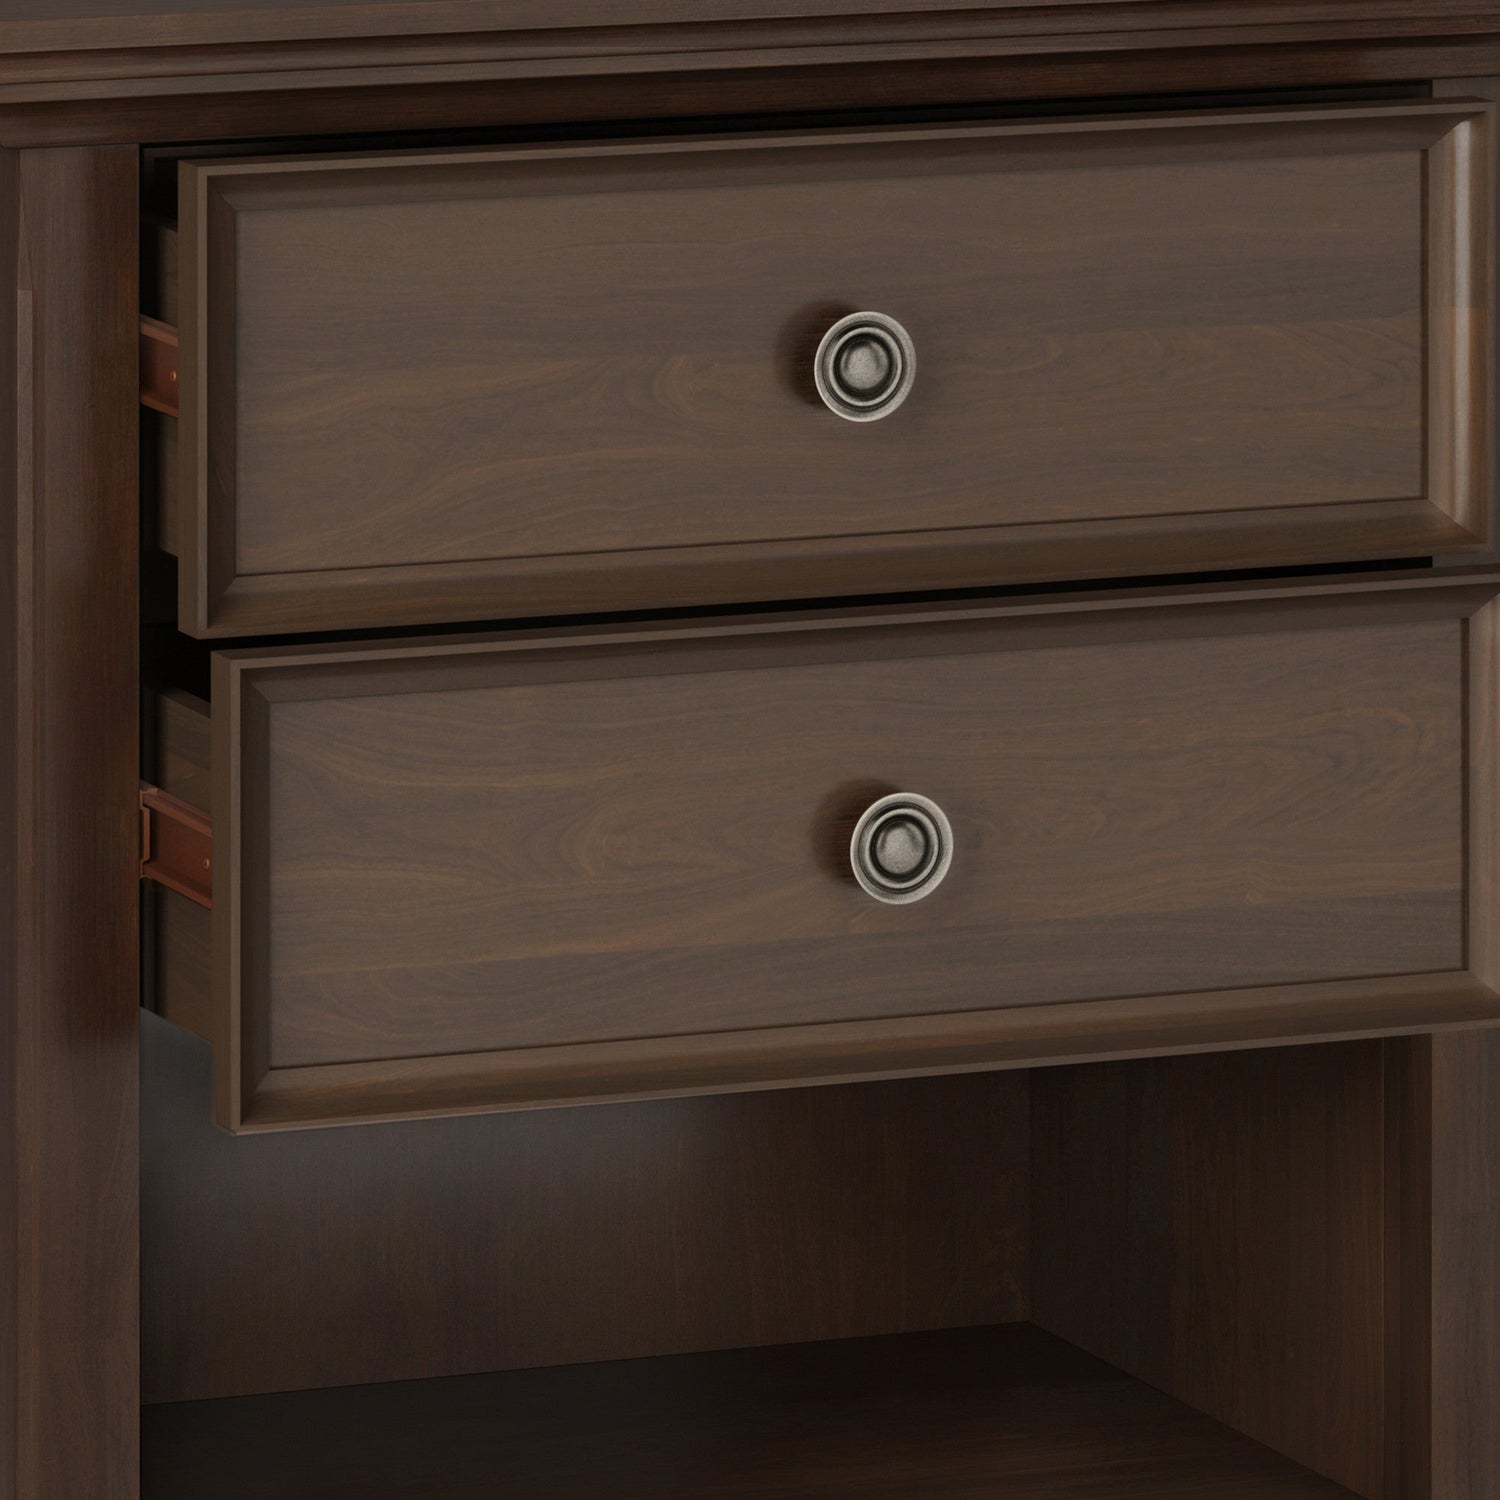 Natural Aged Brown | Amherst Bedside Table